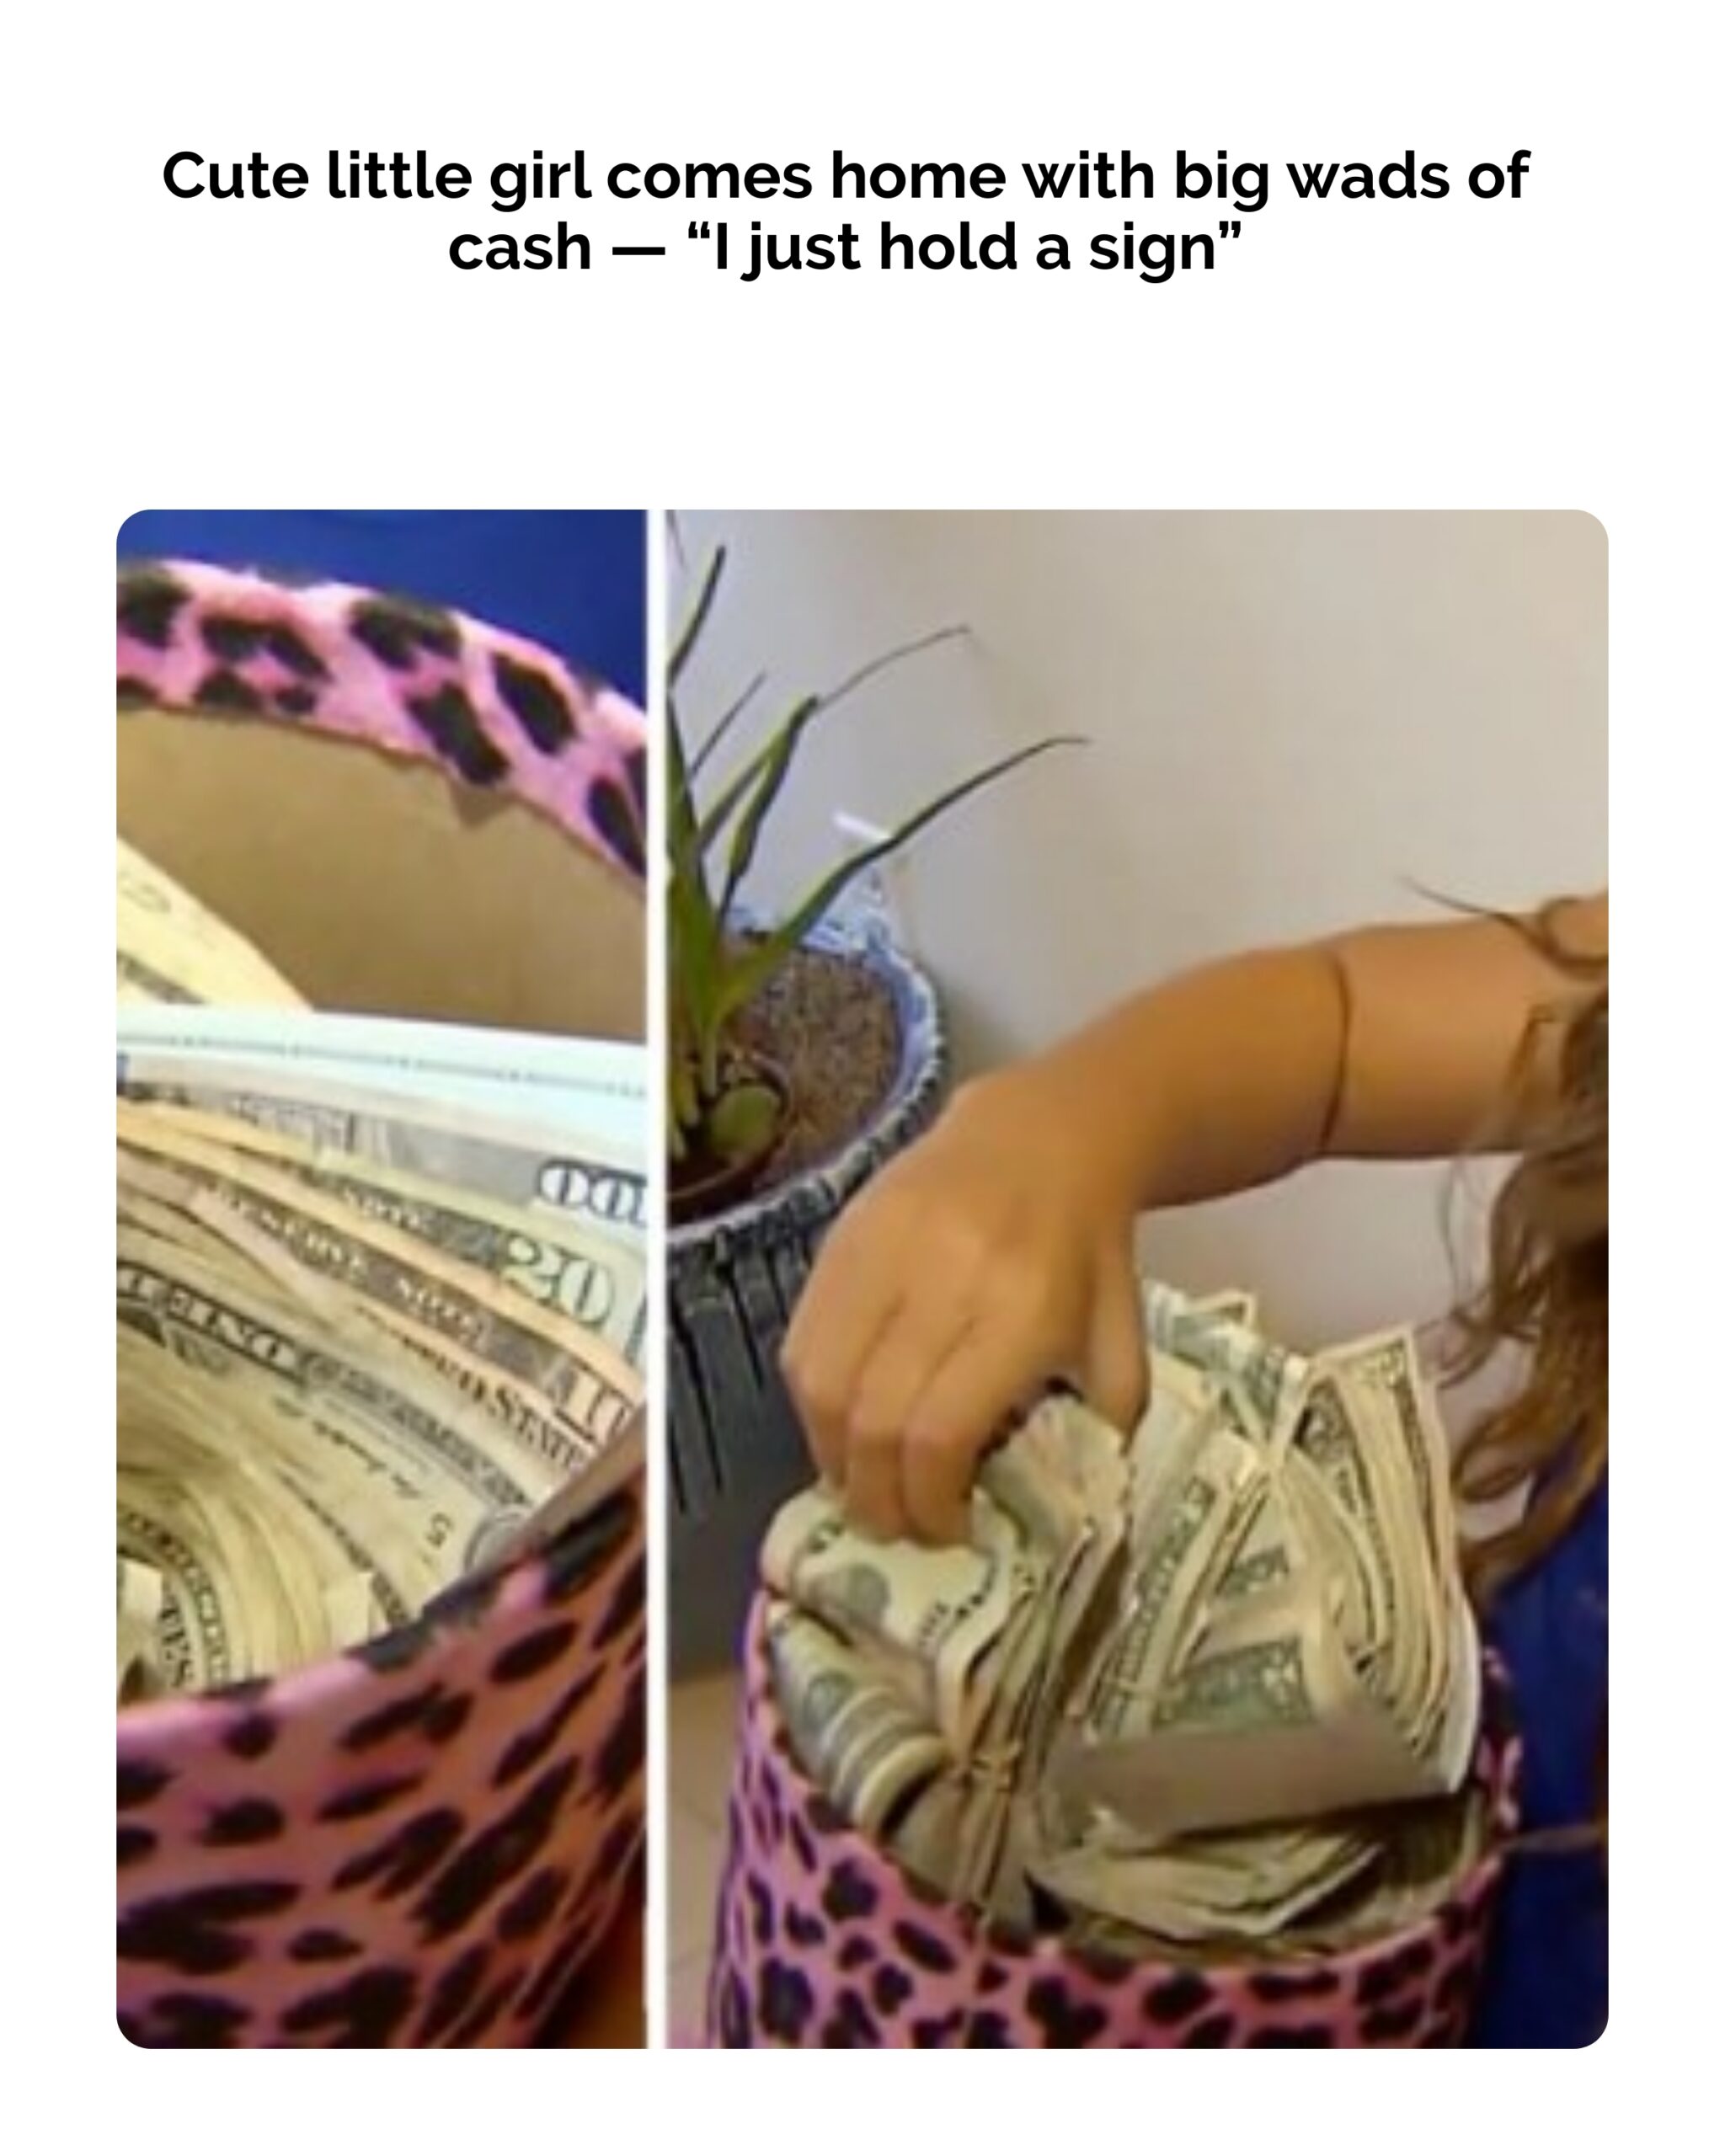 Cute Little Girl Comes Home With Big Wads Of Cash: “I Just Hold A Sign”